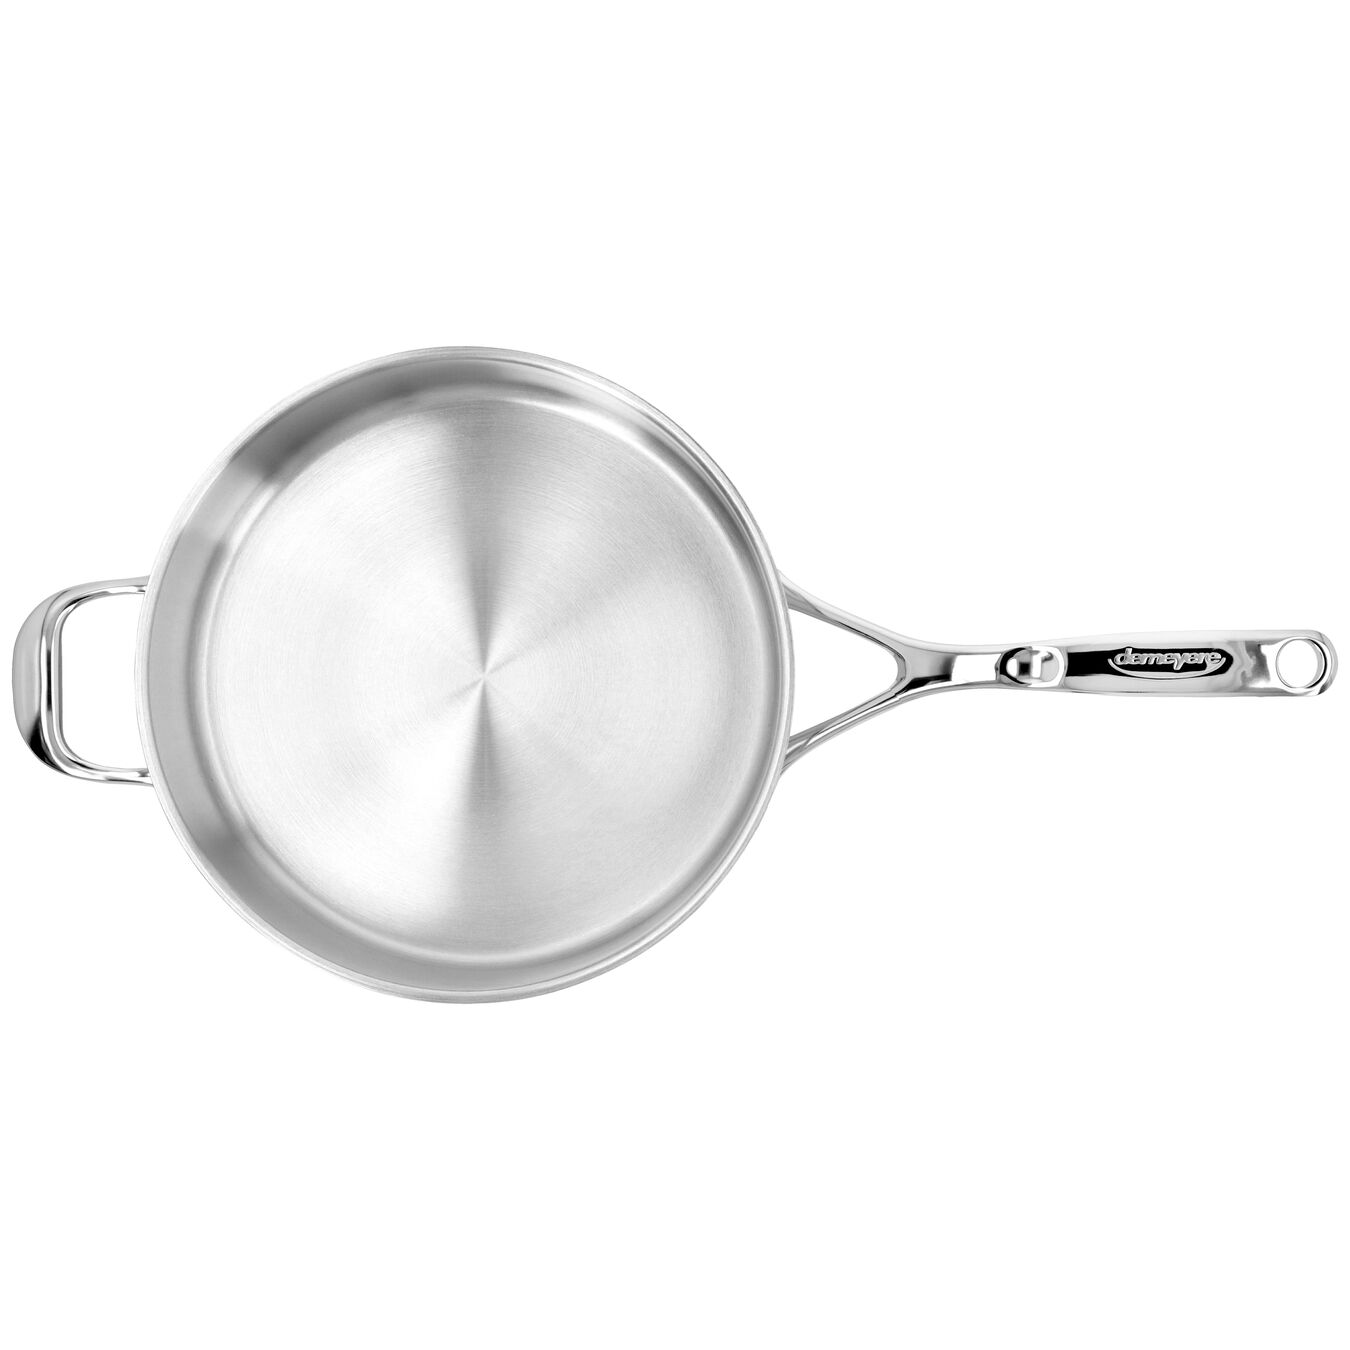 28 cm round 18/10 Stainless Steel Saute pan with lid silver,,large 5